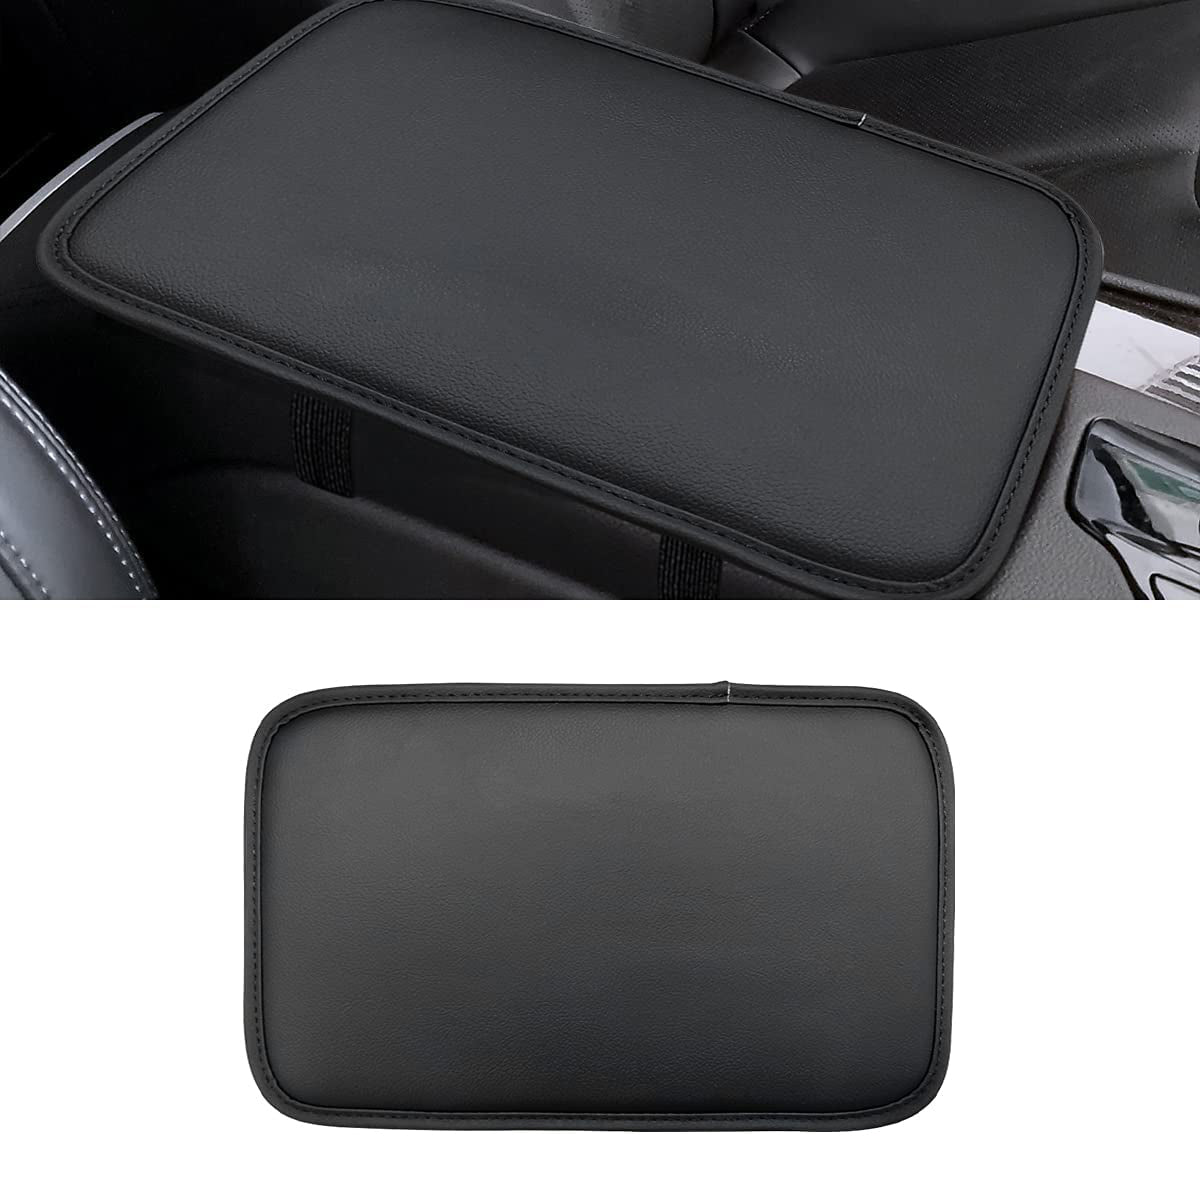 Leather Center Console Cushion Pad, Custom Fit For Your Cars, Waterproof Armrest Seat Box Cover Fit, Car Interior Protection Accessories, Car Accessories PF13991